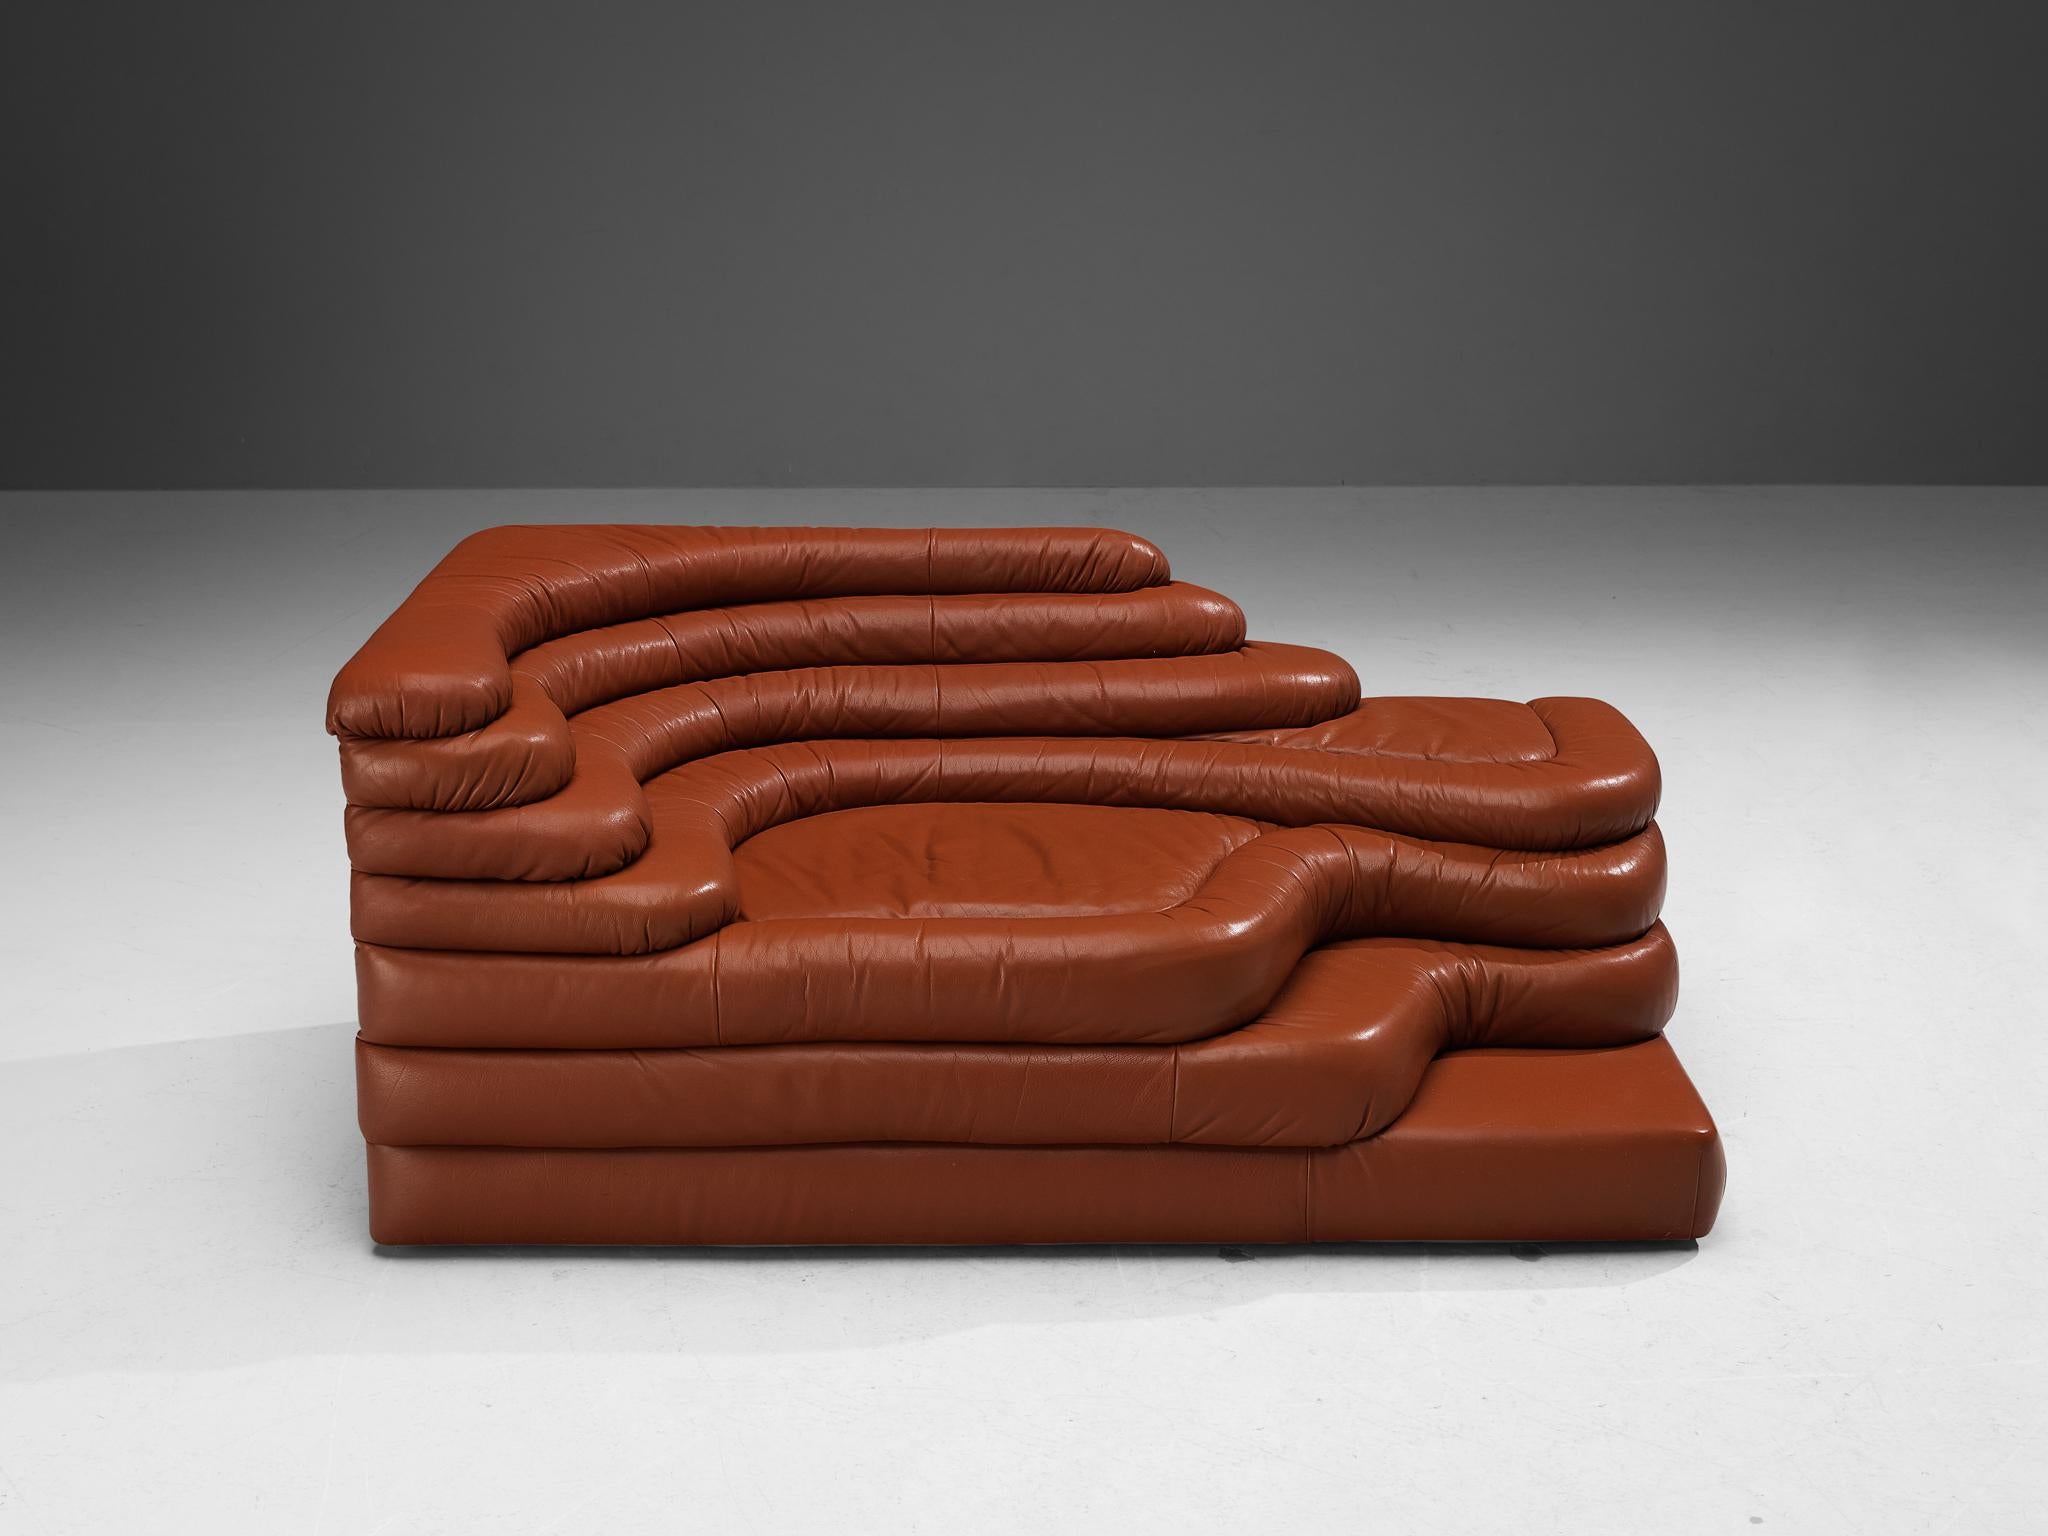 Ubald Klug for De Sede, DS-1025 'Terrazza' landscape sofa, leather, Switzerland, 1970s. 

Waterfall shaped sofa in red brown leather by the Swiss manufacturer De Sede. The design for this sofa was inspired by mountains and especially the Alps. This